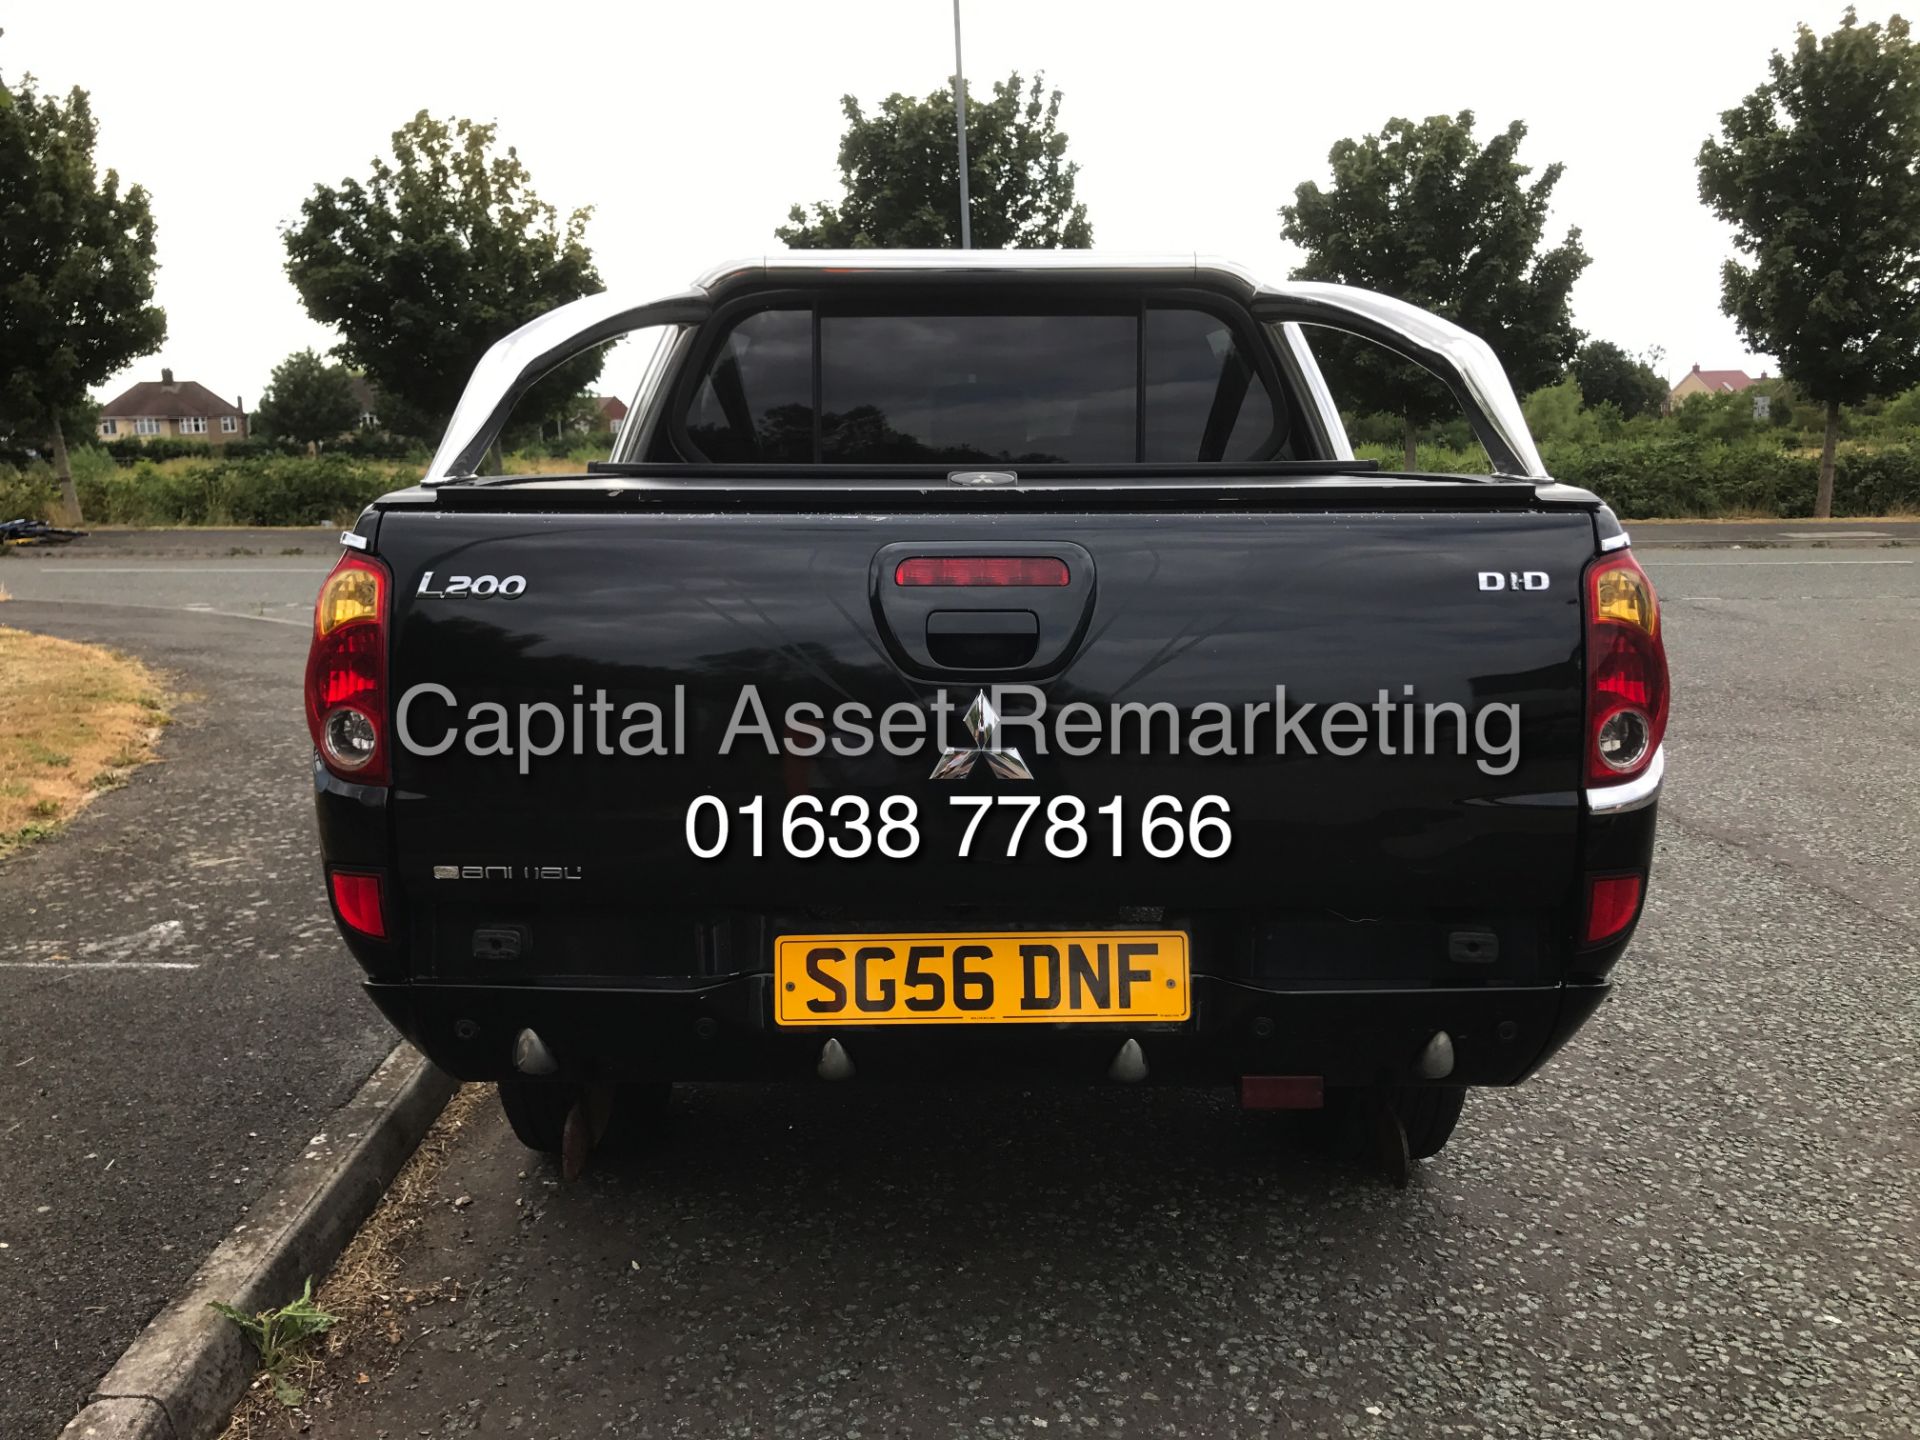 On Sale MITSUBISHI L200 "ANIMAL" 2.5DID "AUTO" DOUBLE CAB PICK UP -BLACK EDITION LOW MILES LEATHER - Image 8 of 22